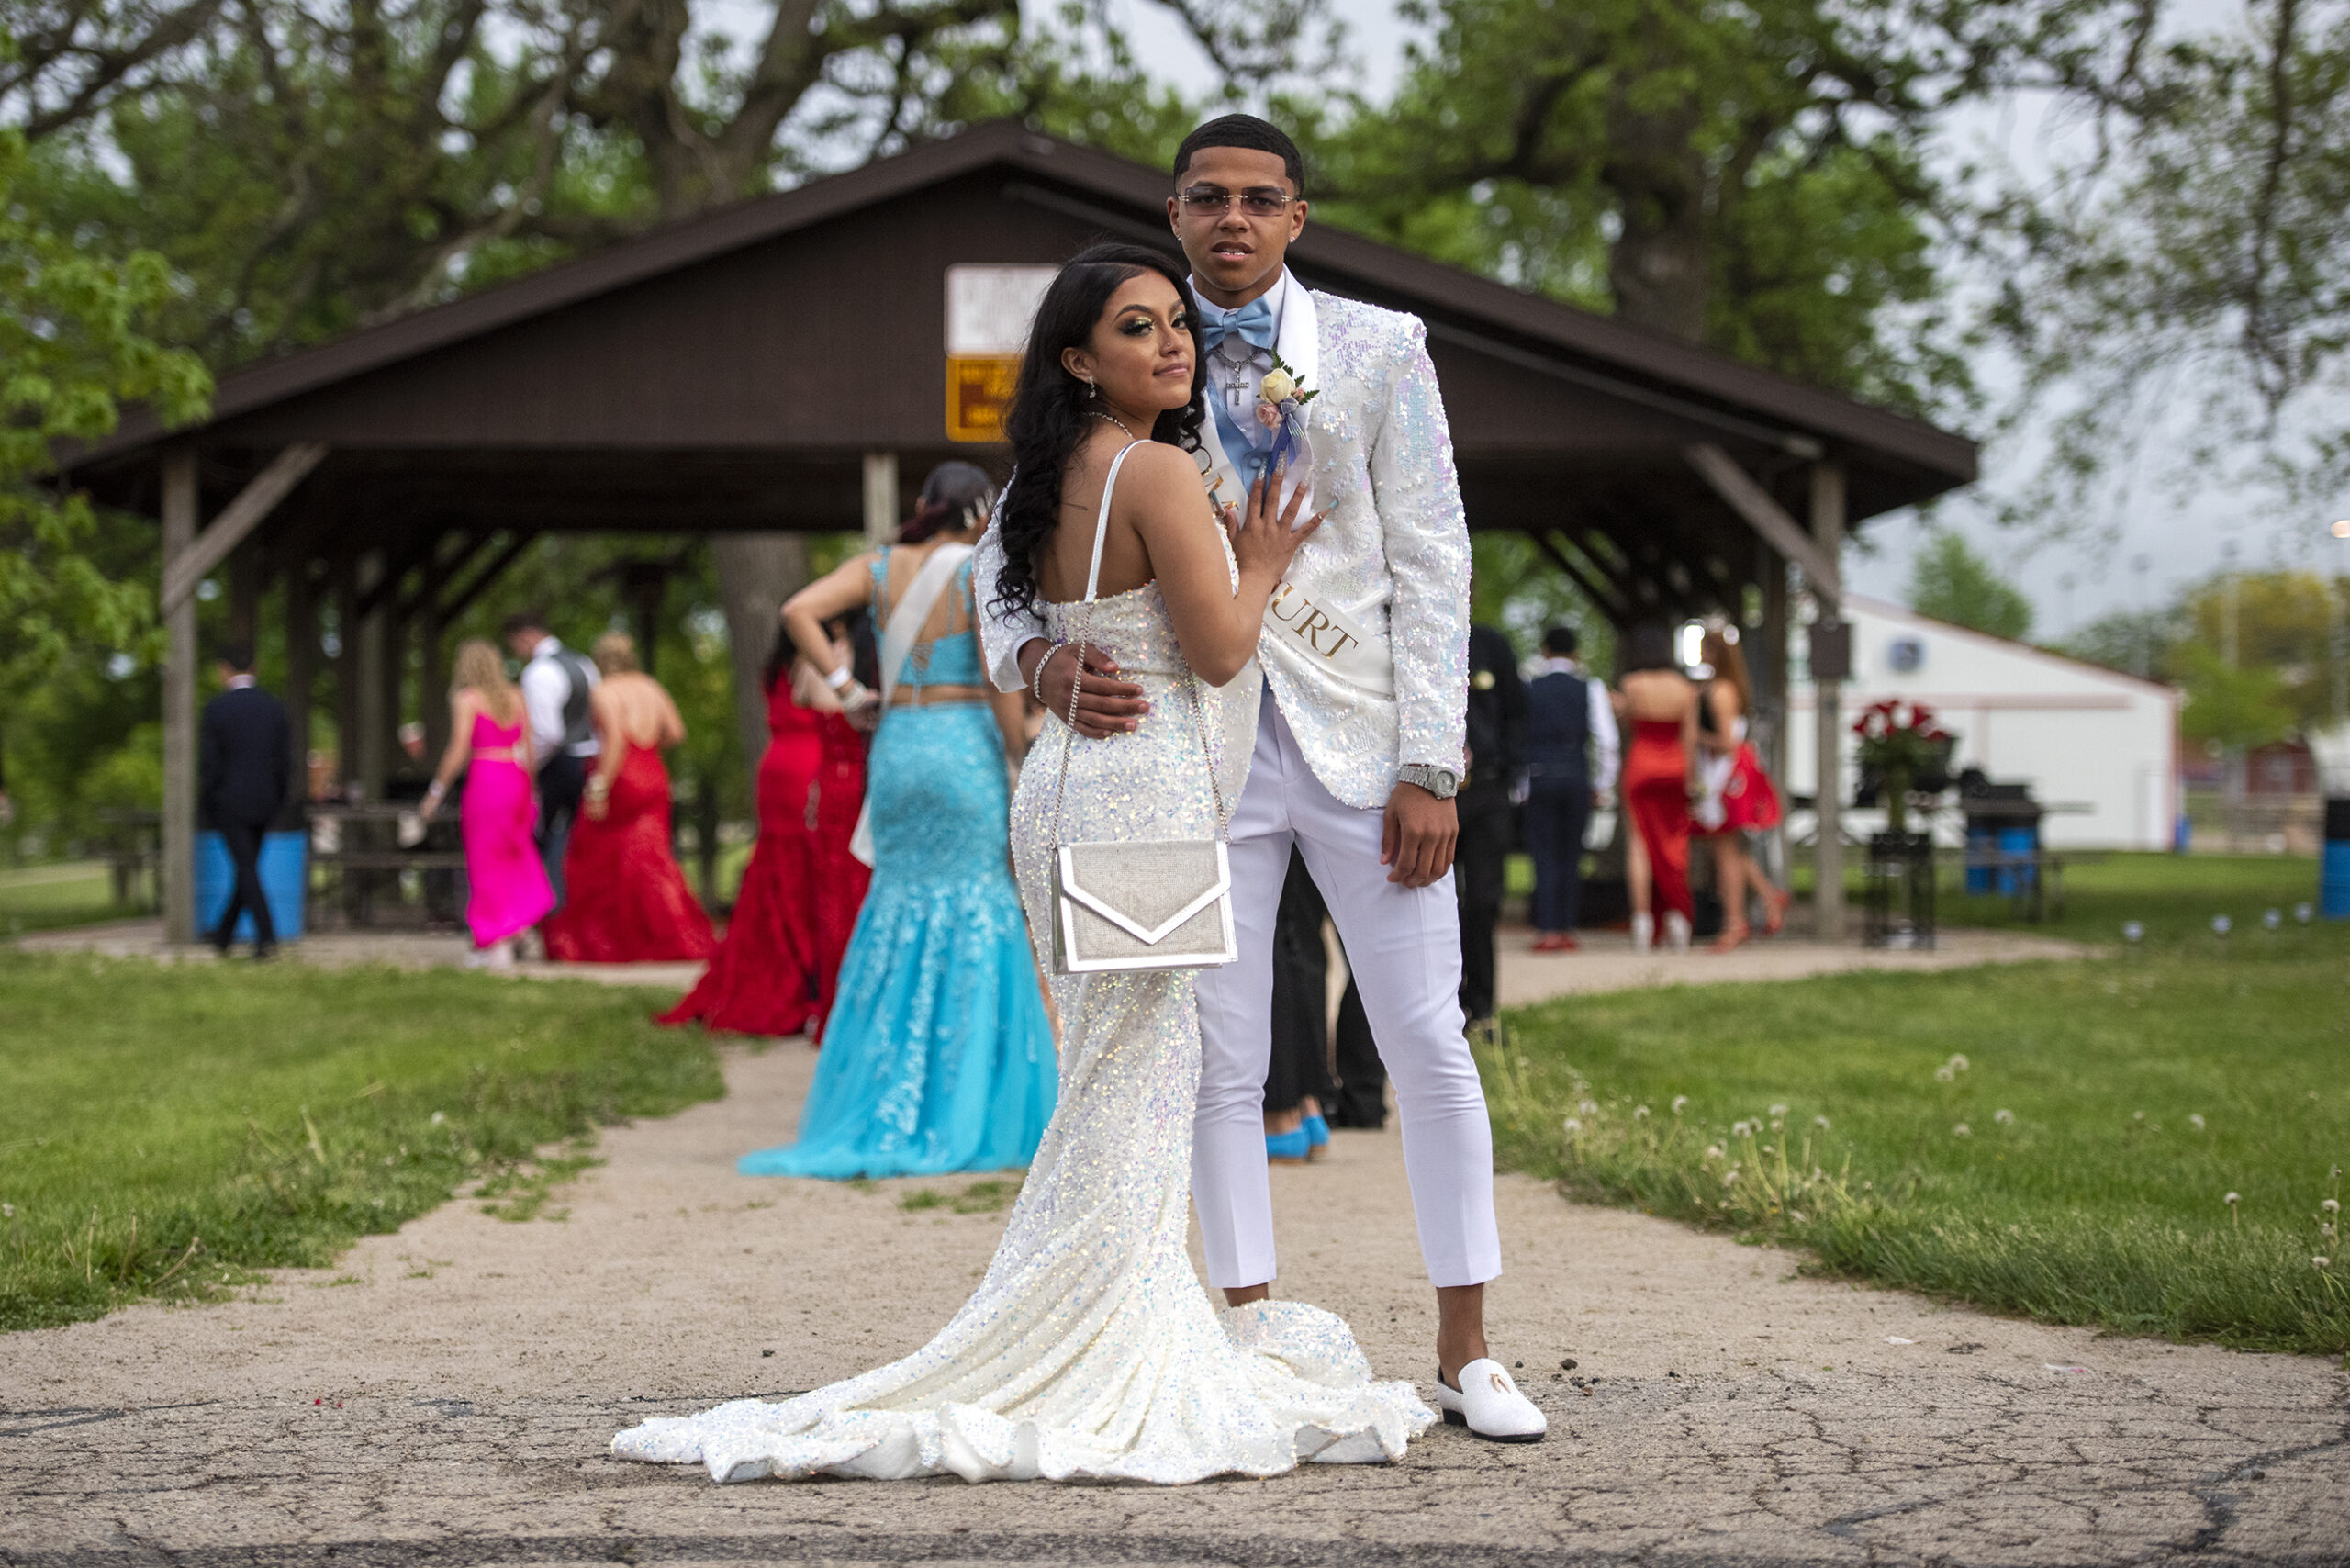 A couple of attendees wear all white as they pose together outside at the fairgrounds.